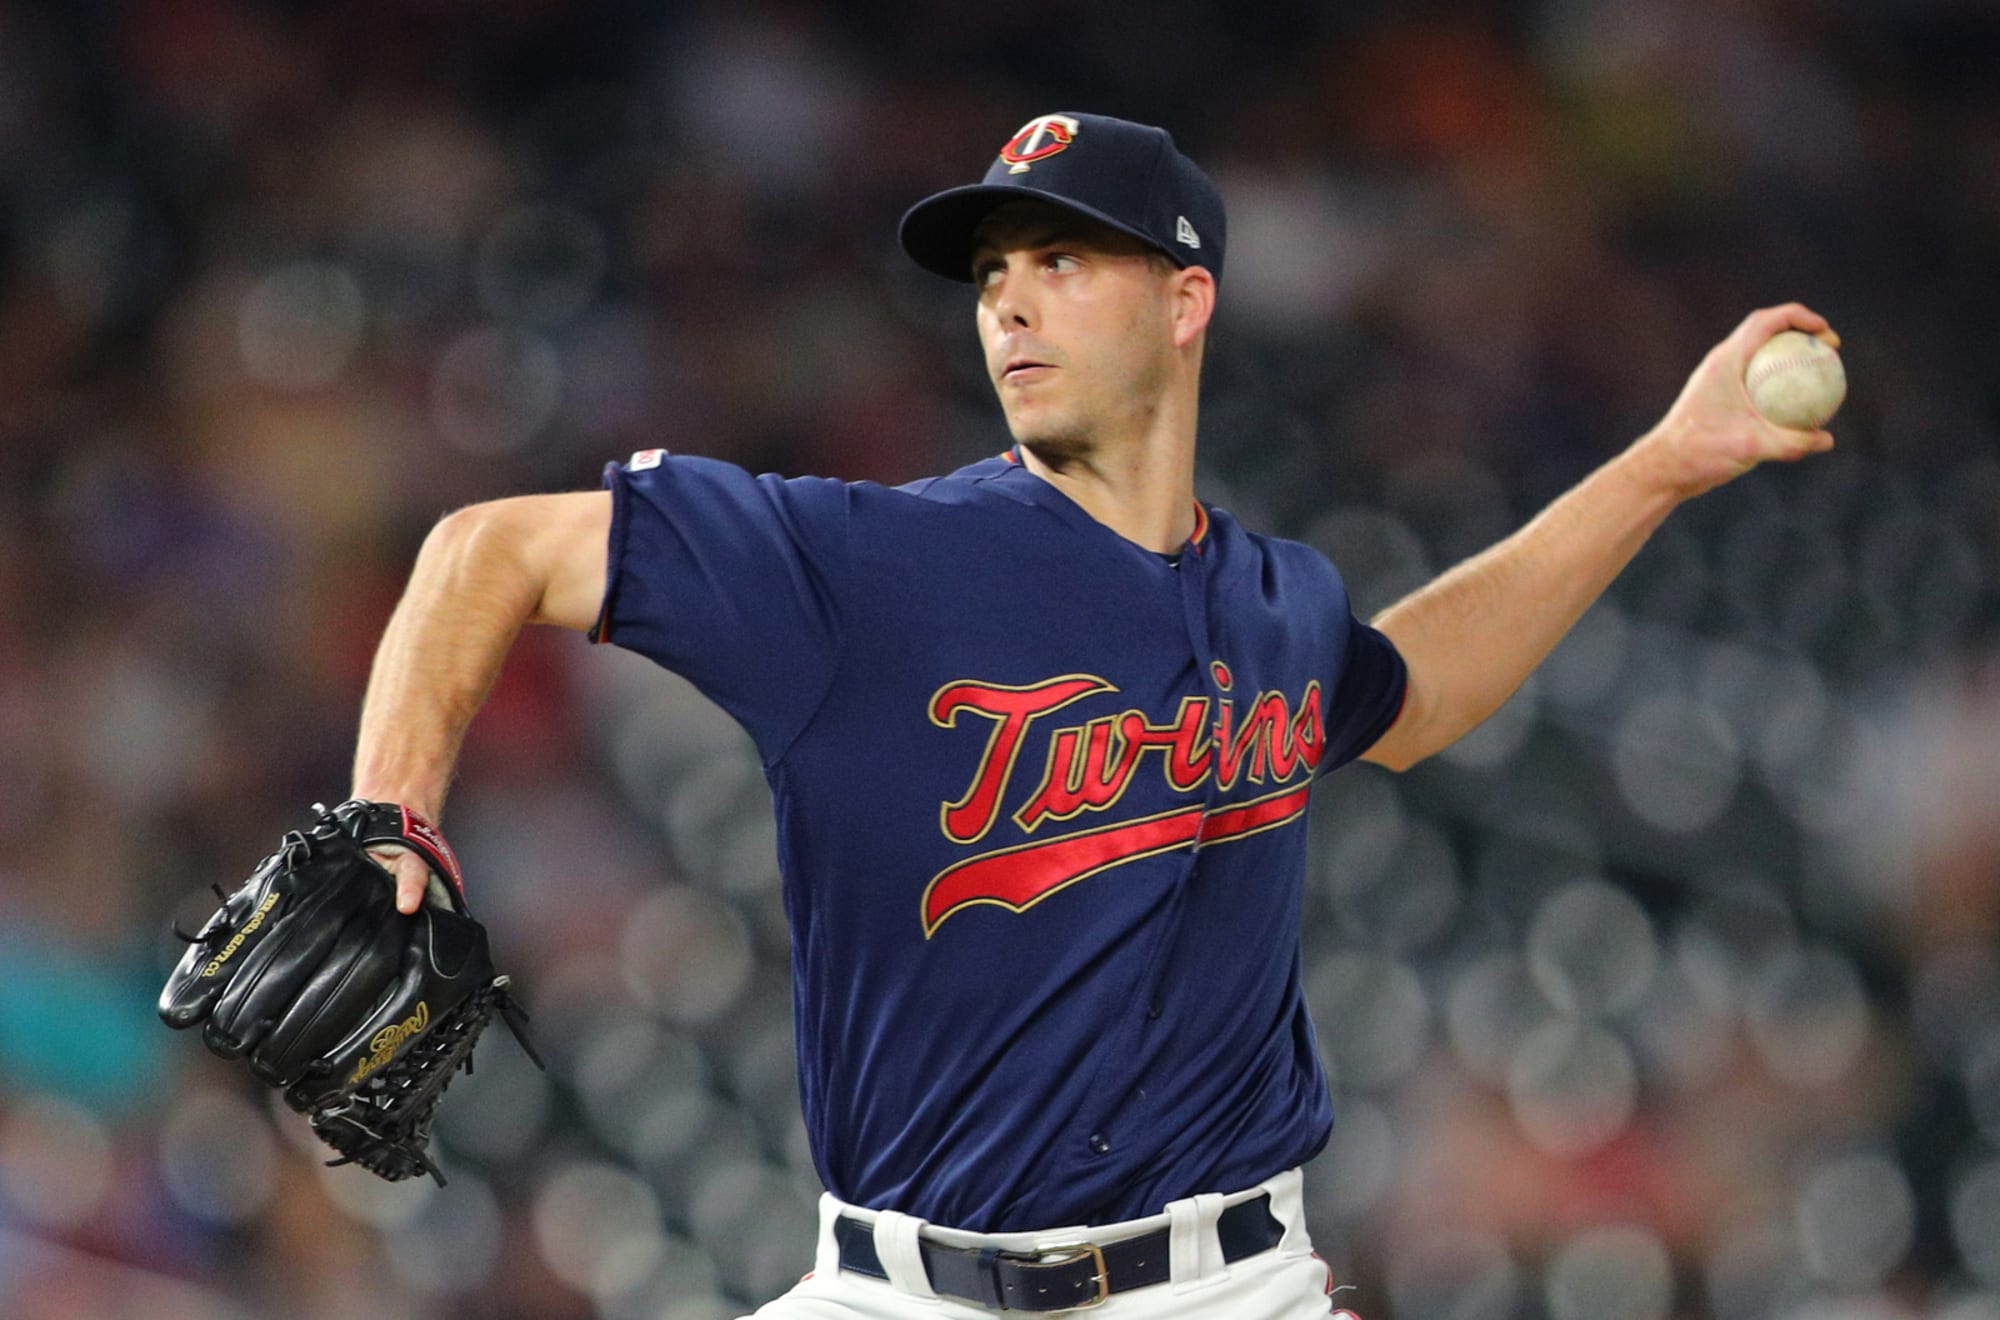 MLB The Show 20 Ratings for the Minnesota Twins Pitchers